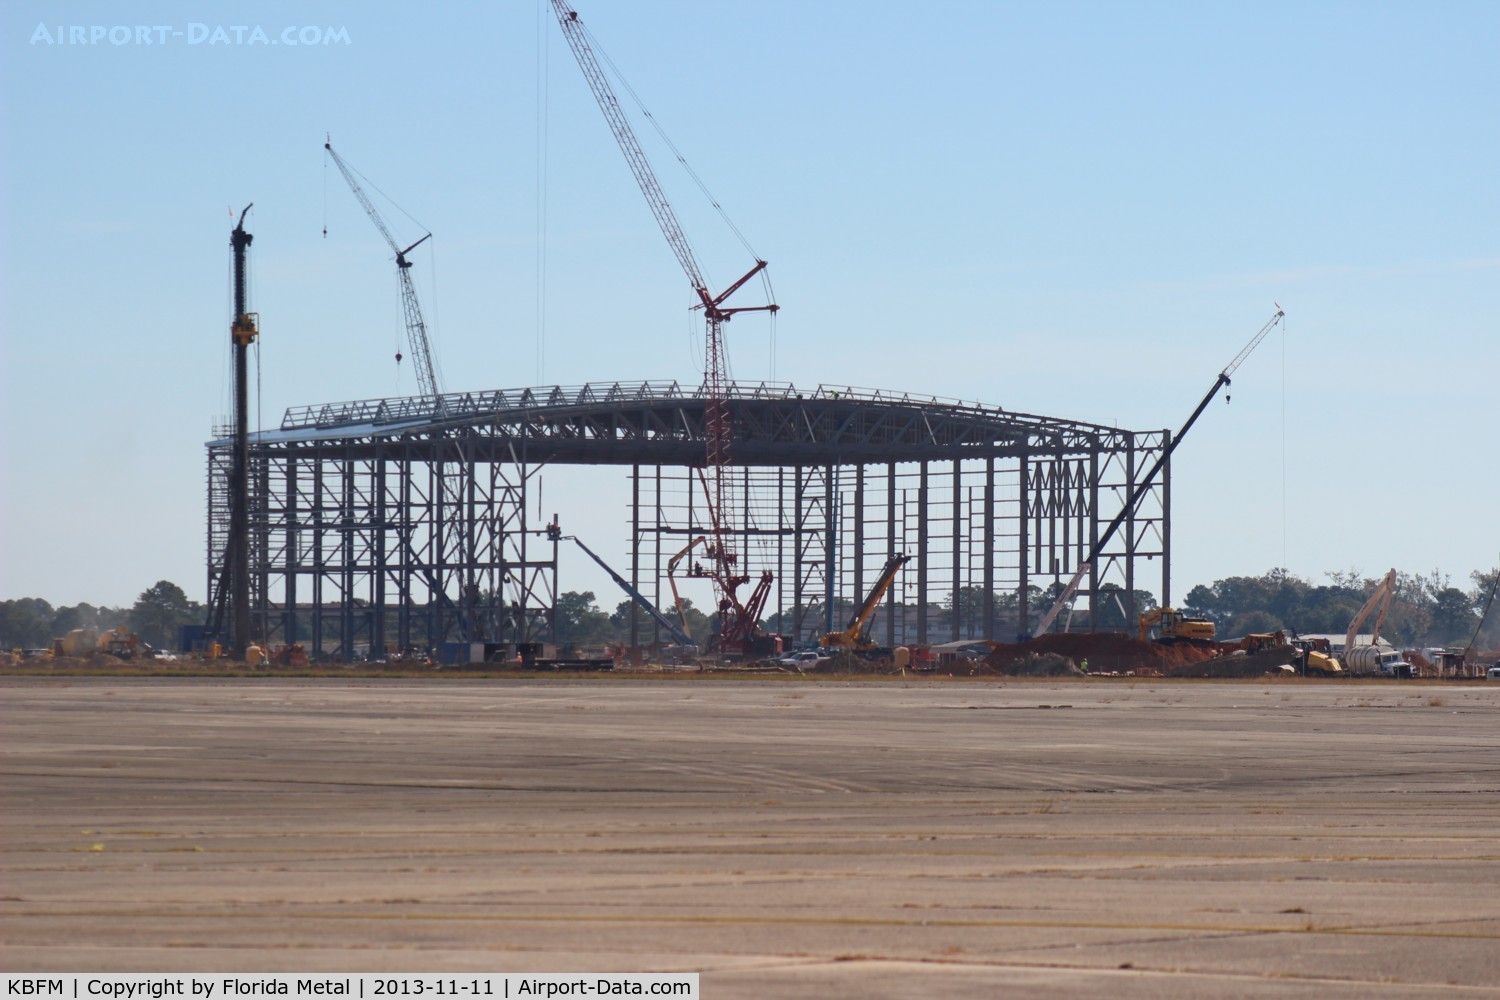 Mobile Downtown Airport (BFM) - New Airbus plant being built at the Downtown Mobile Alabama airport